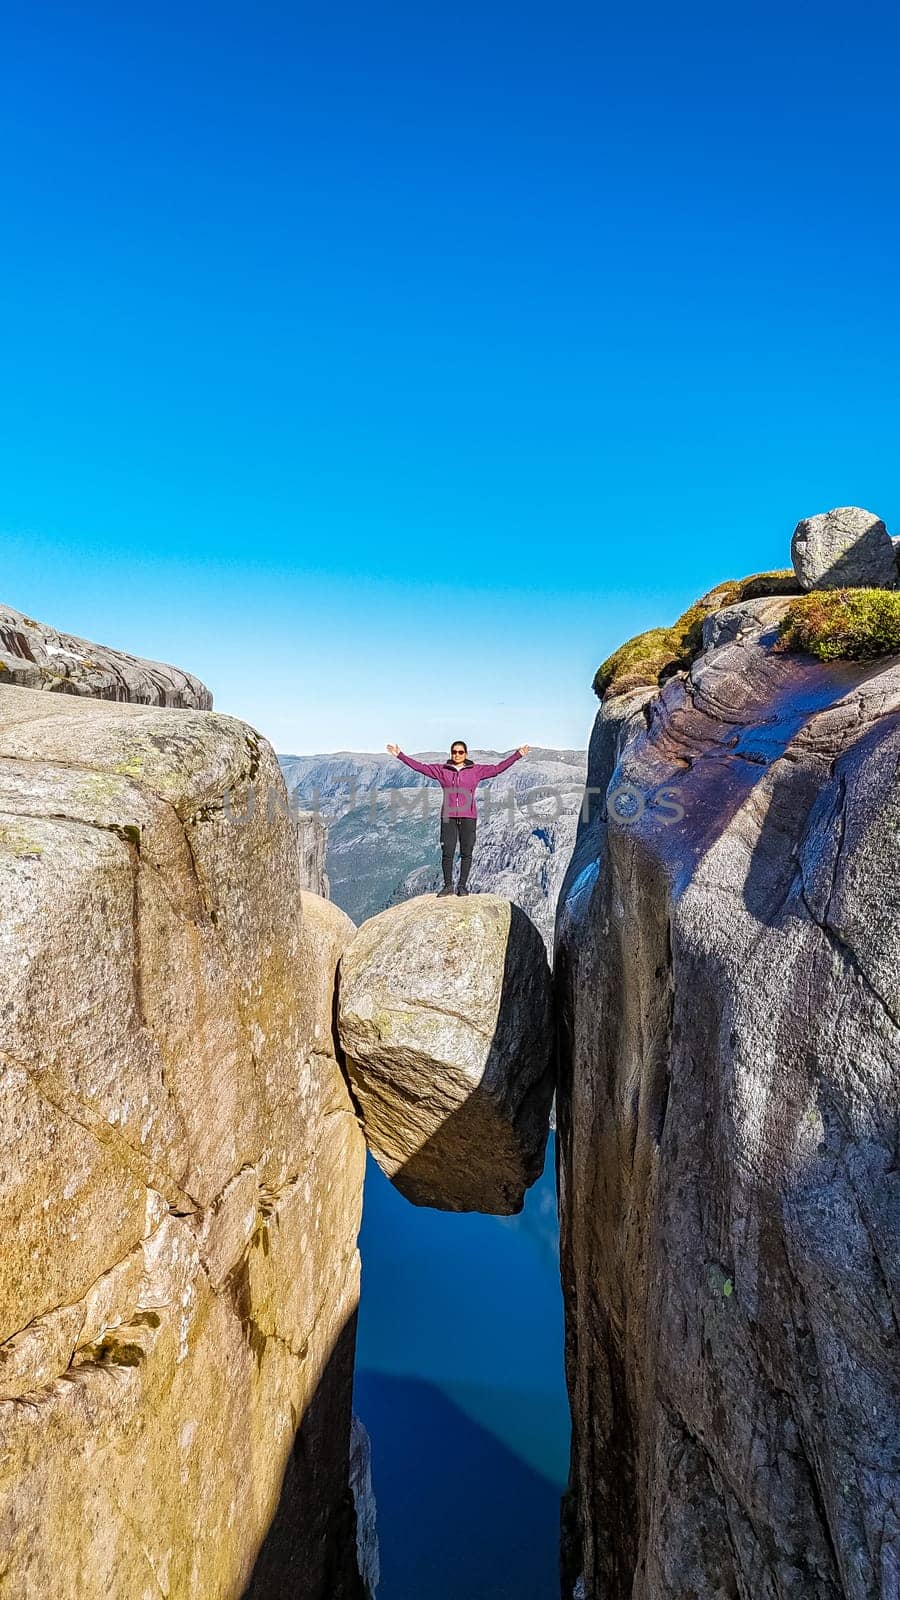 A person stands with arms outstretched on a rock formation at Kjeragbolten, Norway by fokkebok